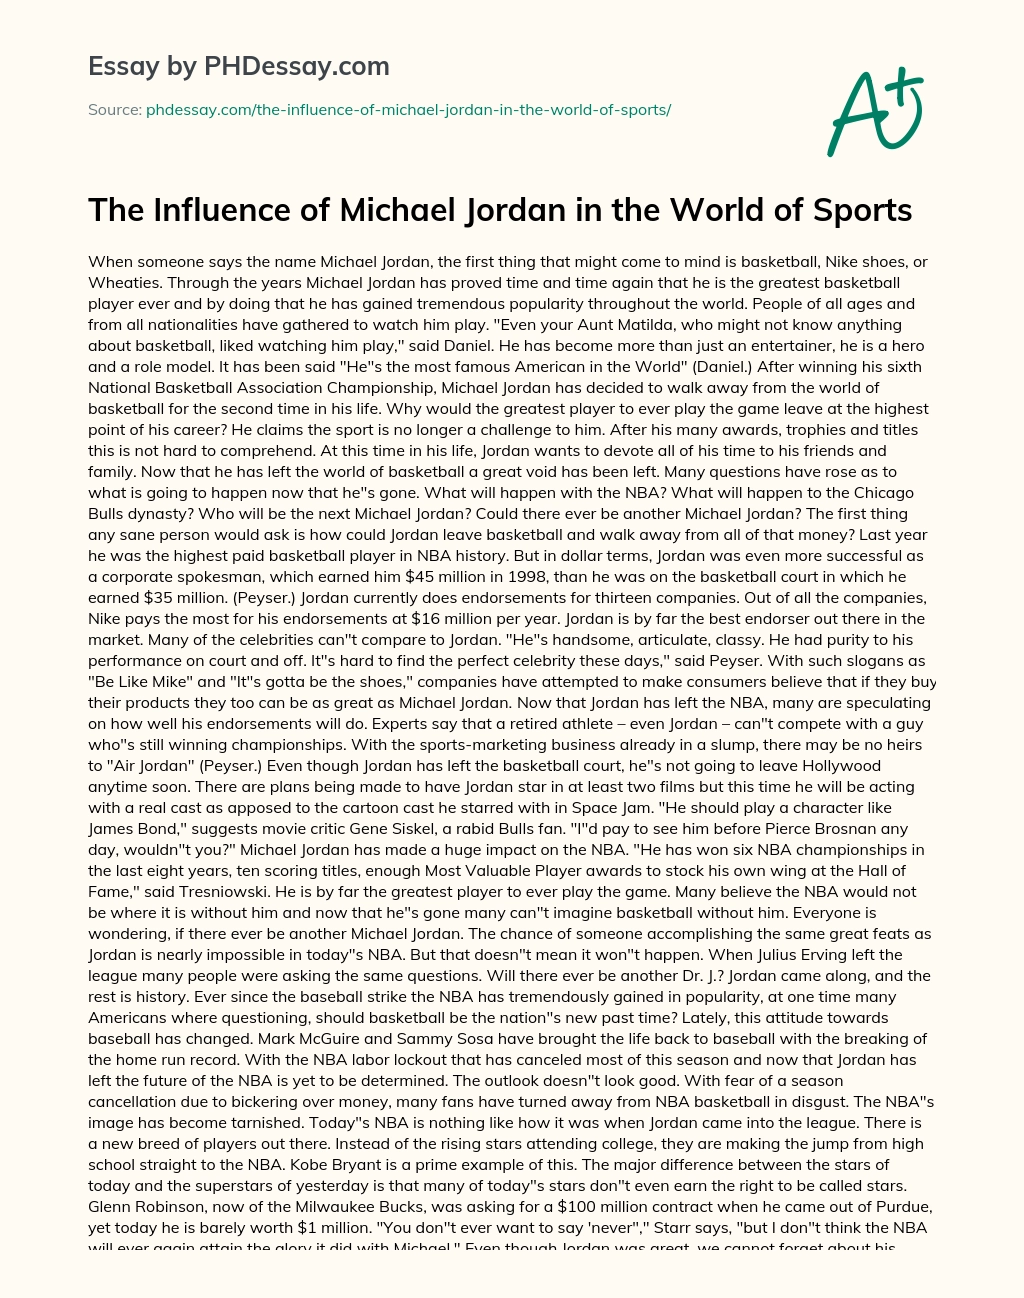 The Influence of Michael Jordan in the World of Sports essay